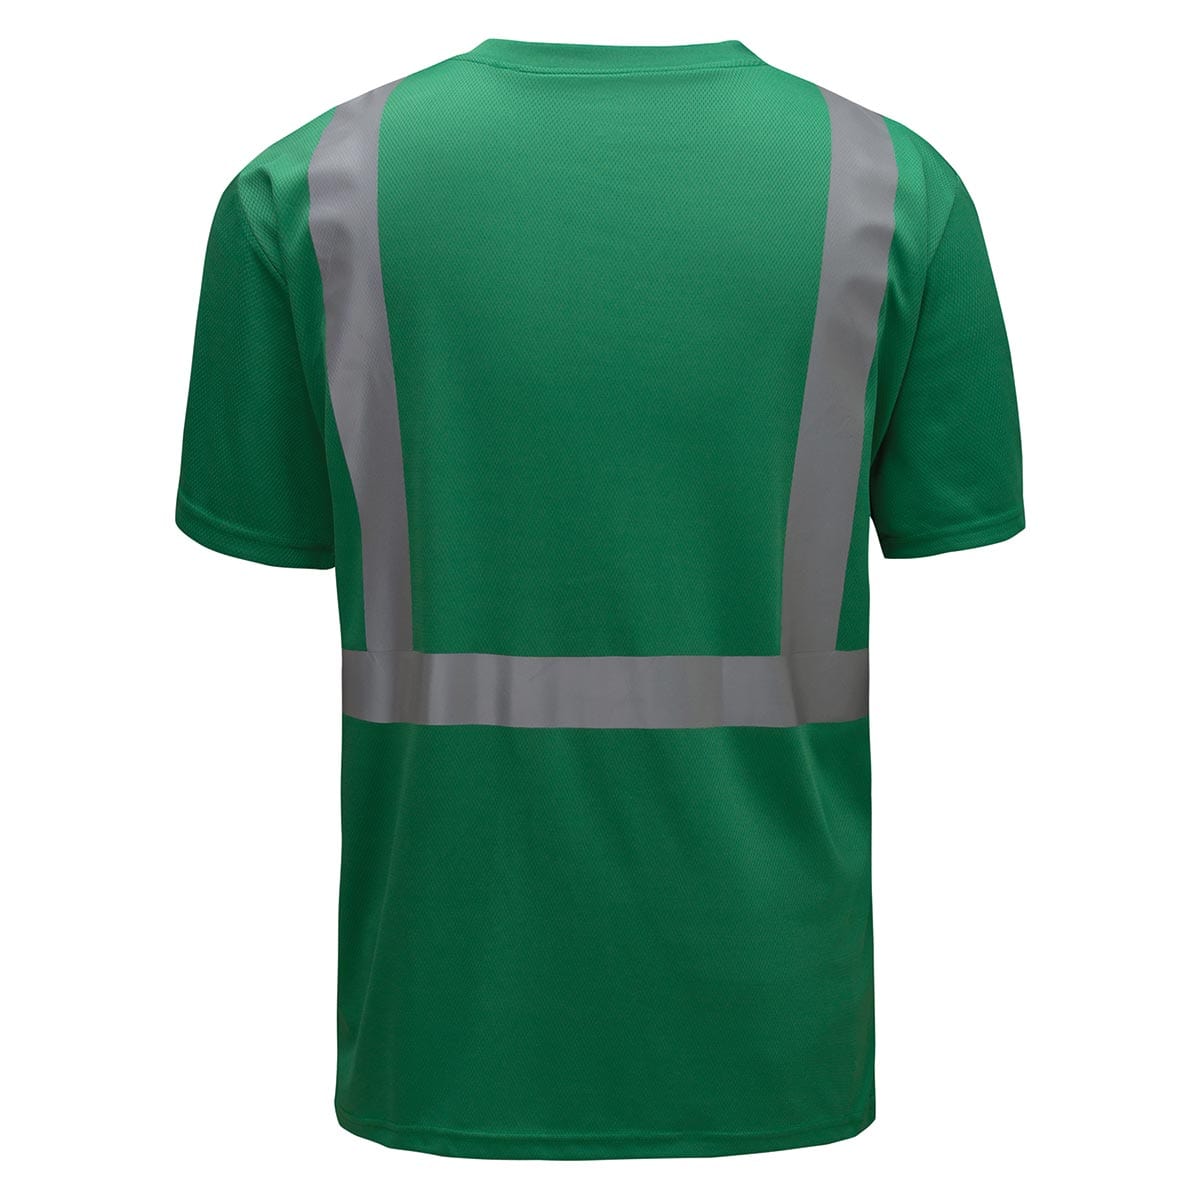 GSS Safety Short Sleeve Enhanced Visibility Shirt, Forest Green